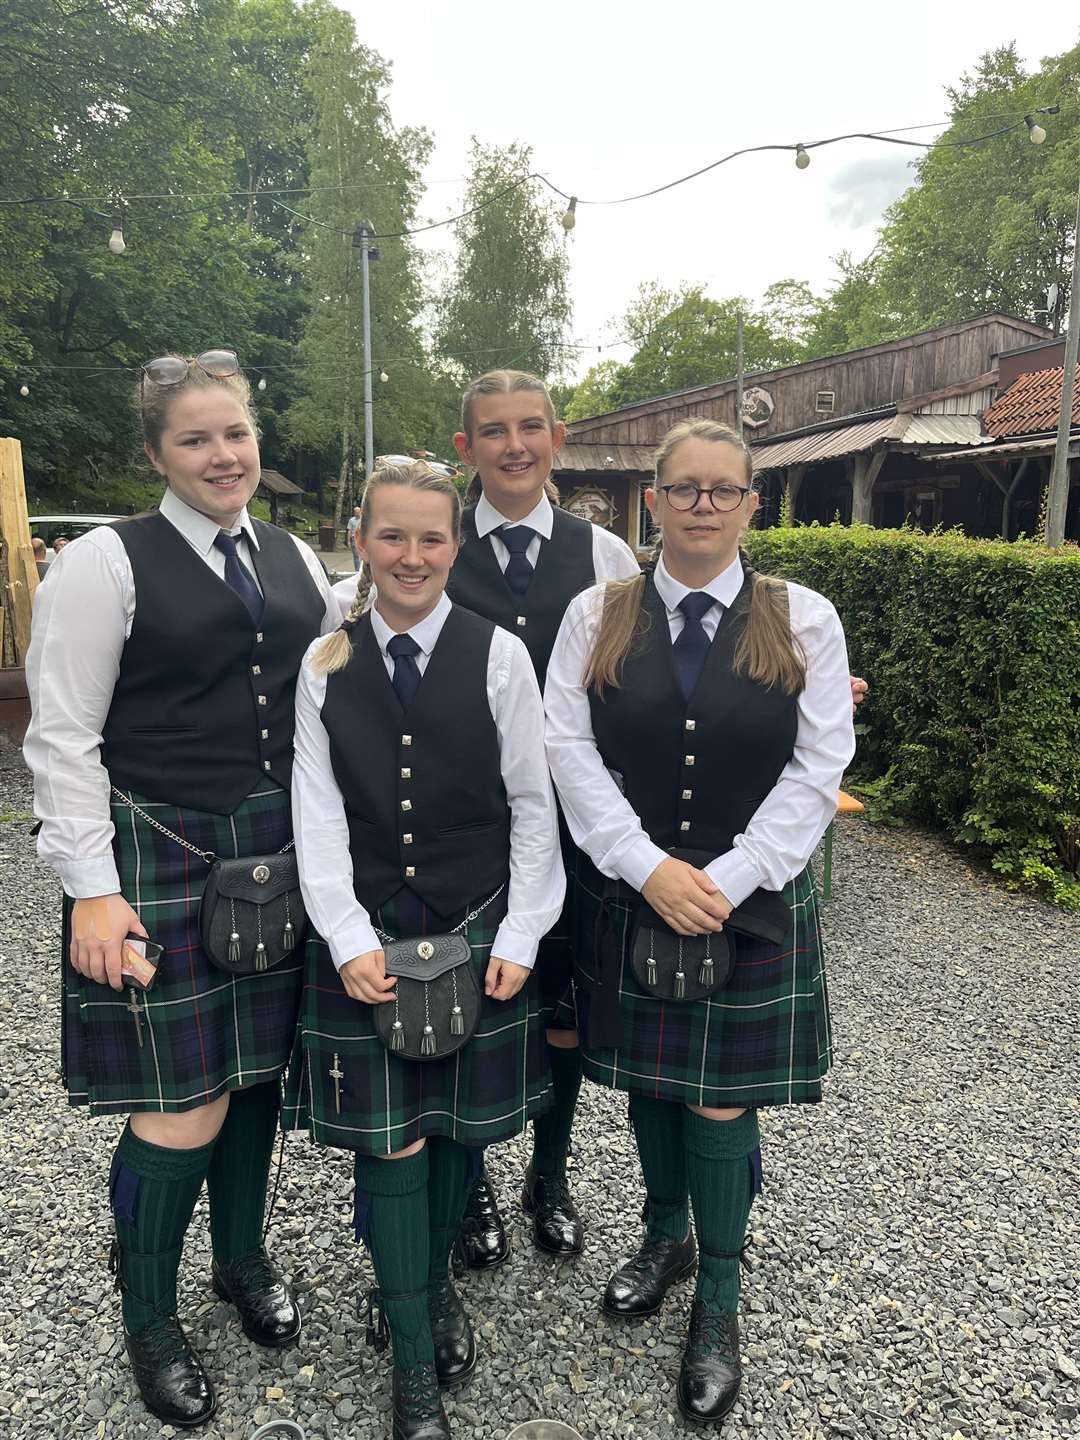 Pipe Sergeant Emma Lawrence, Lily Carmichael, Cora Meechan and Sarah Mcnally.